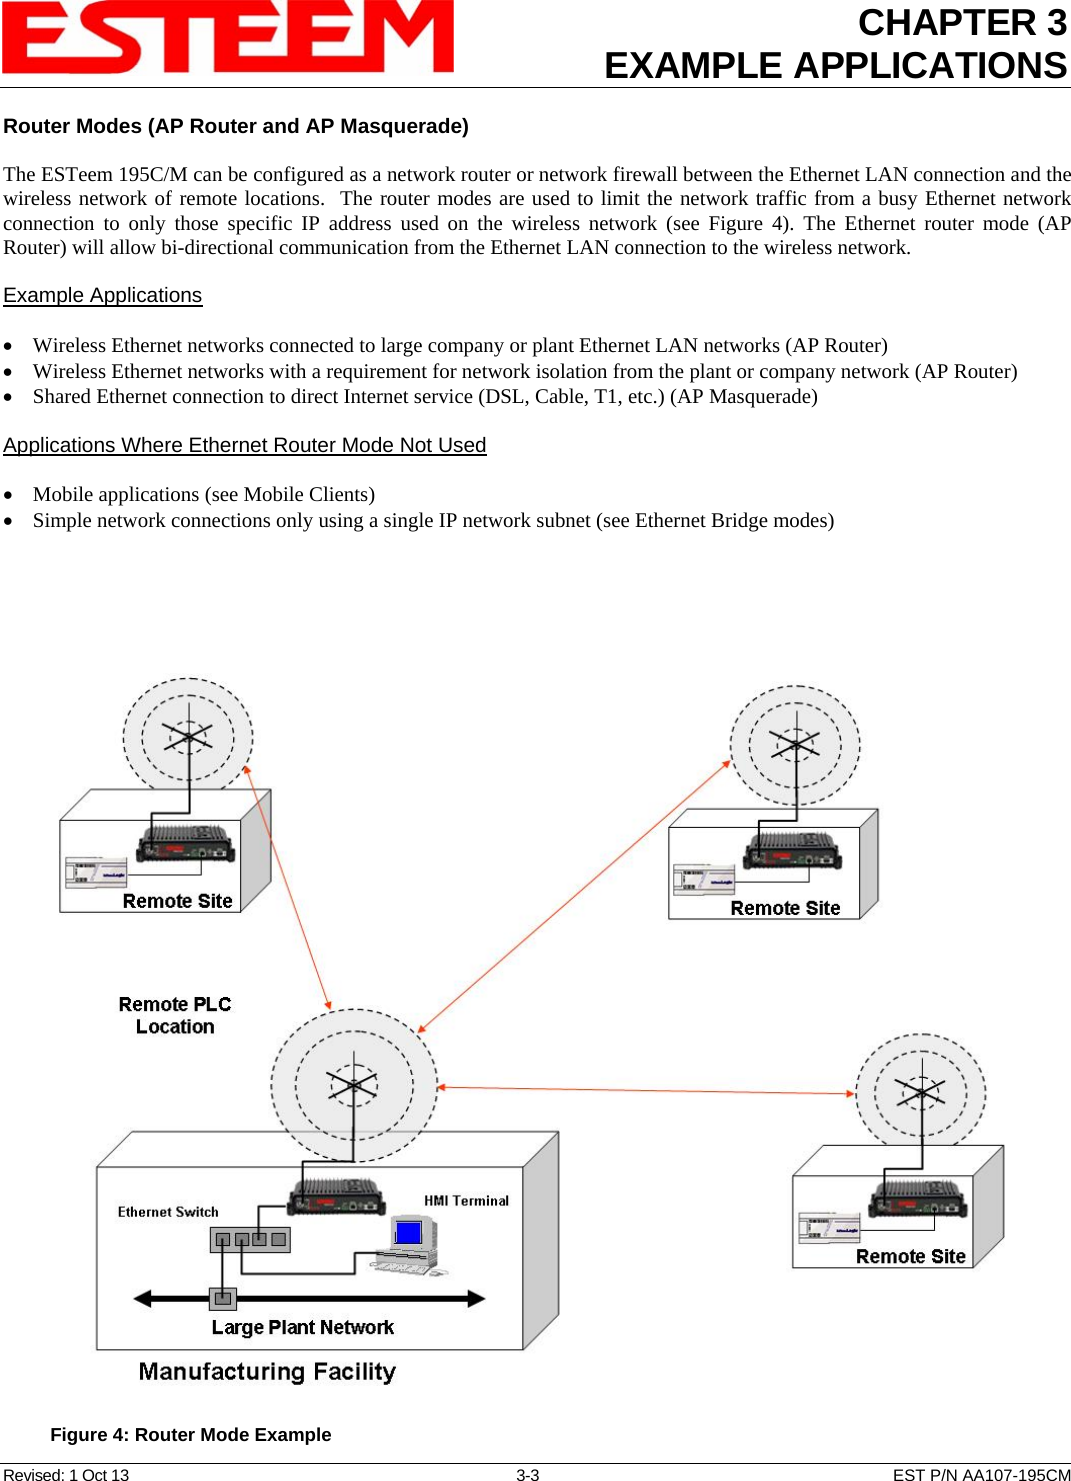 CHAPTER 3 EXAMPLE APPLICATIONS  Router Modes (AP Router and AP Masquerade)  The ESTeem 195C/M can be configured as a network router or network firewall between the Ethernet LAN connection and the wireless network of remote locations.  The router modes are used to limit the network traffic from a busy Ethernet network connection to only those specific IP address used on the wireless network (see Figure 4). The Ethernet router mode (AP Router) will allow bi-directional communication from the Ethernet LAN connection to the wireless network.  Example Applications  • Wireless Ethernet networks connected to large company or plant Ethernet LAN networks (AP Router) • Wireless Ethernet networks with a requirement for network isolation from the plant or company network (AP Router) • Shared Ethernet connection to direct Internet service (DSL, Cable, T1, etc.) (AP Masquerade)  Applications Where Ethernet Router Mode Not Used  • Mobile applications (see Mobile Clients) • Simple network connections only using a single IP network subnet (see Ethernet Bridge modes)    Figure 4: Router Mode Example Revised: 1 Oct 13  3-3  EST P/N AA107-195CM 